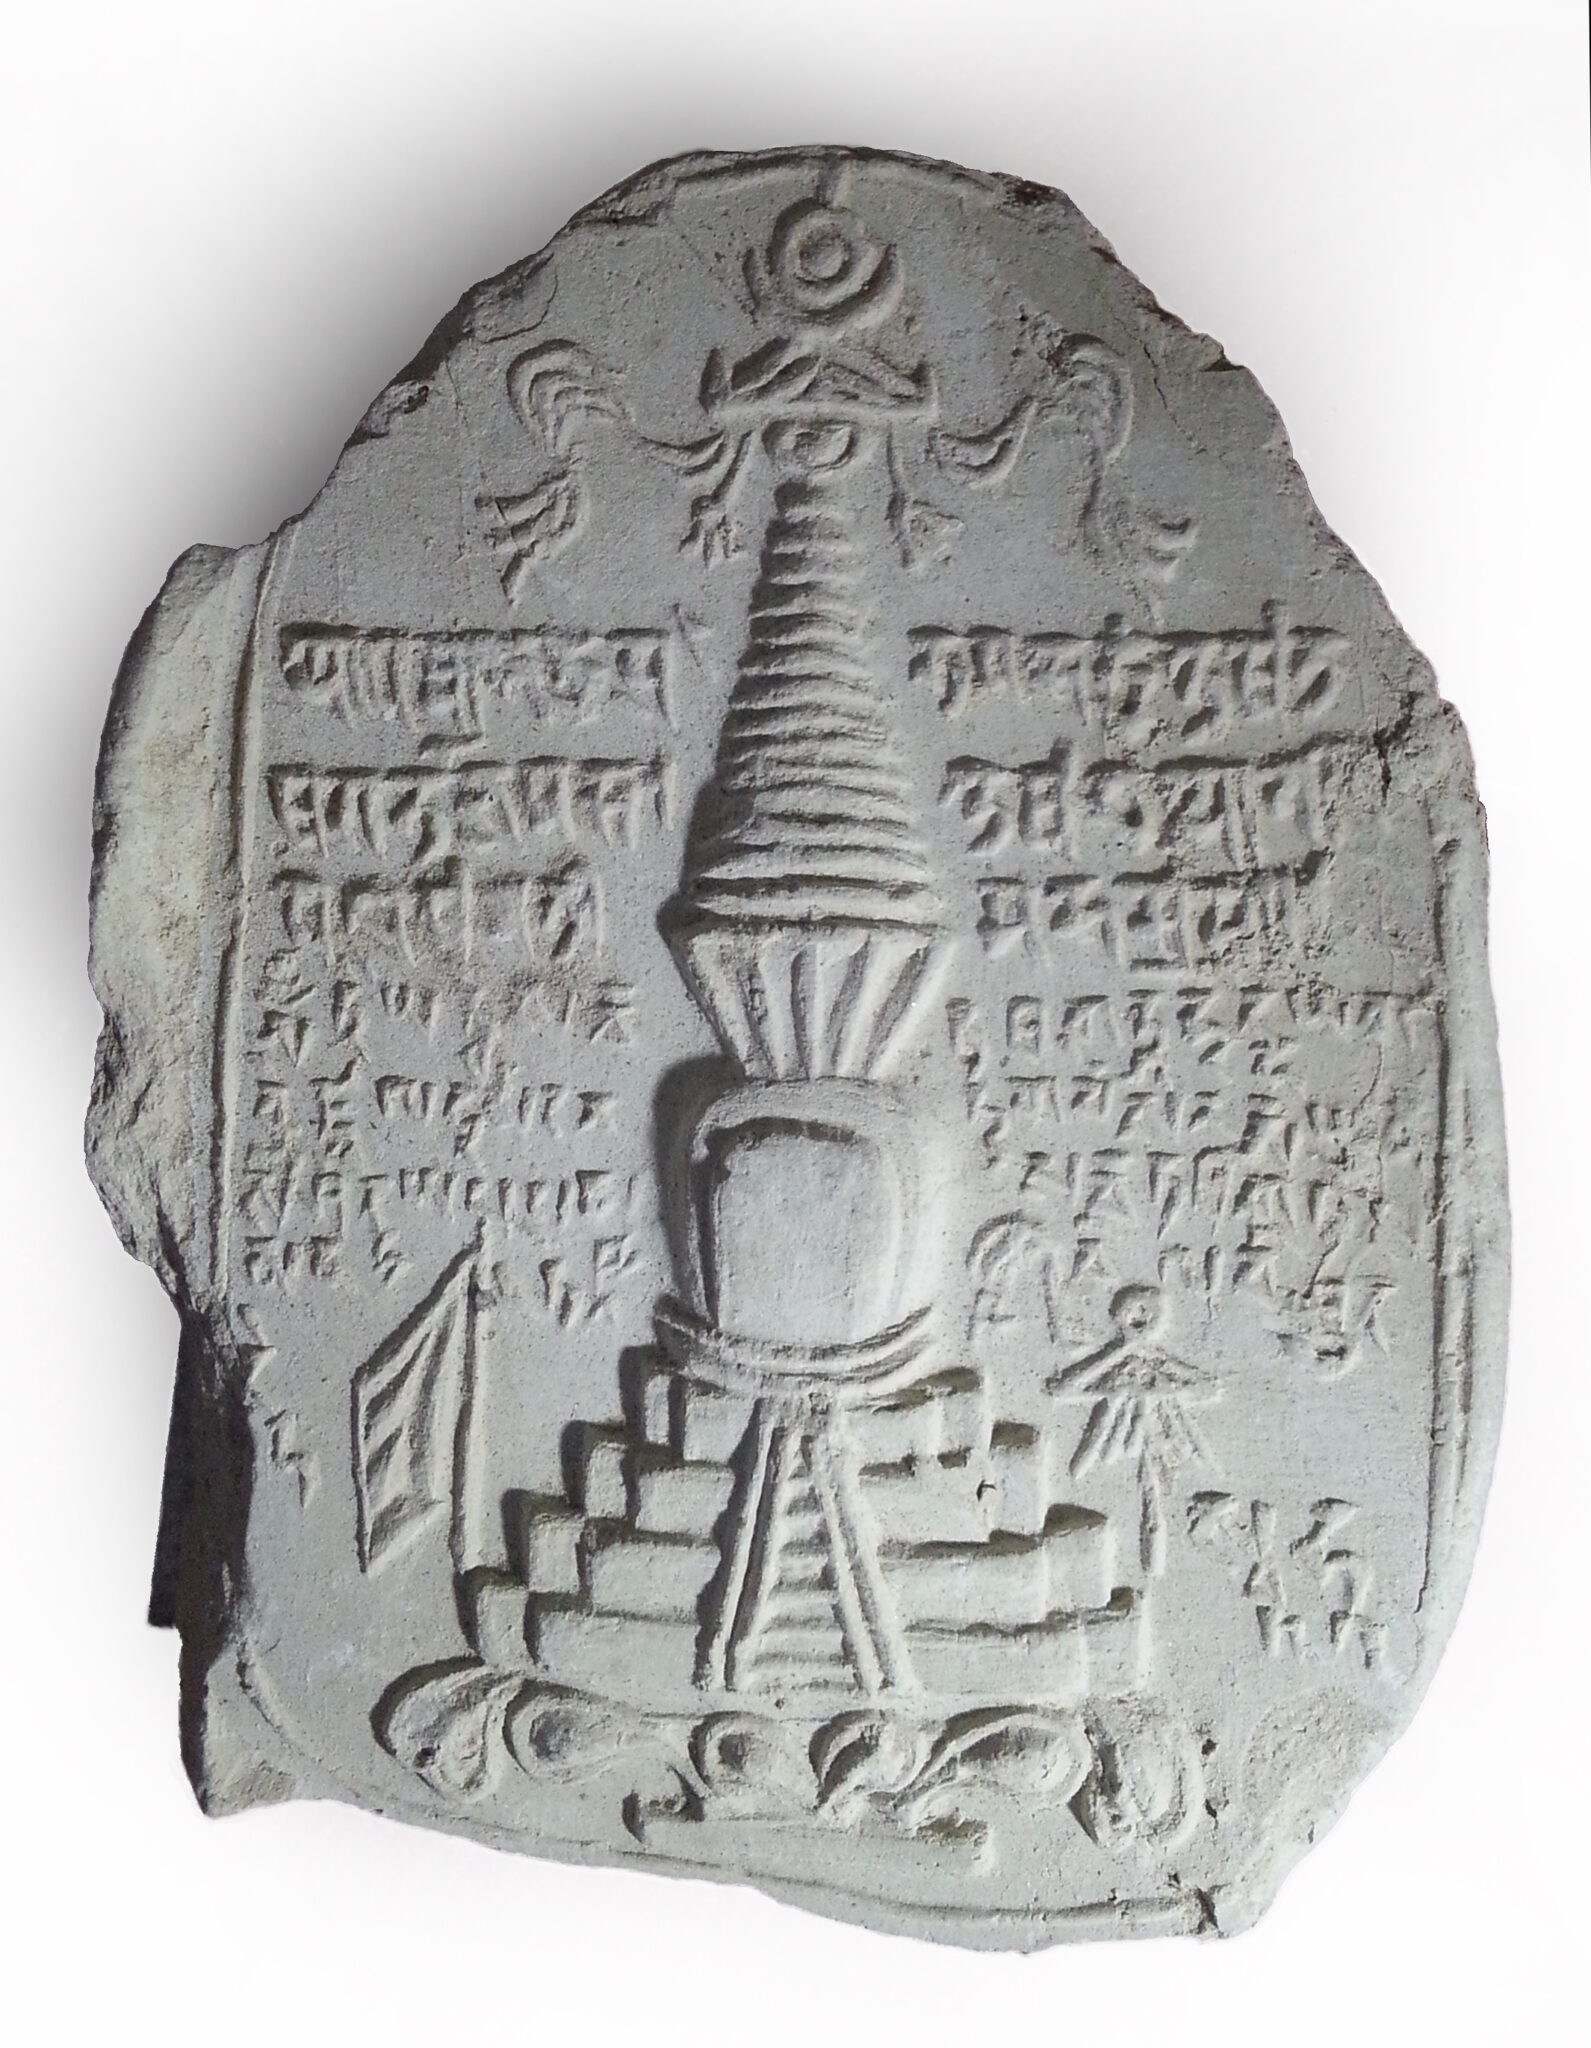 Well-defined stupa featuring tiered base and conical tower surrounded by lines of Tibetan text